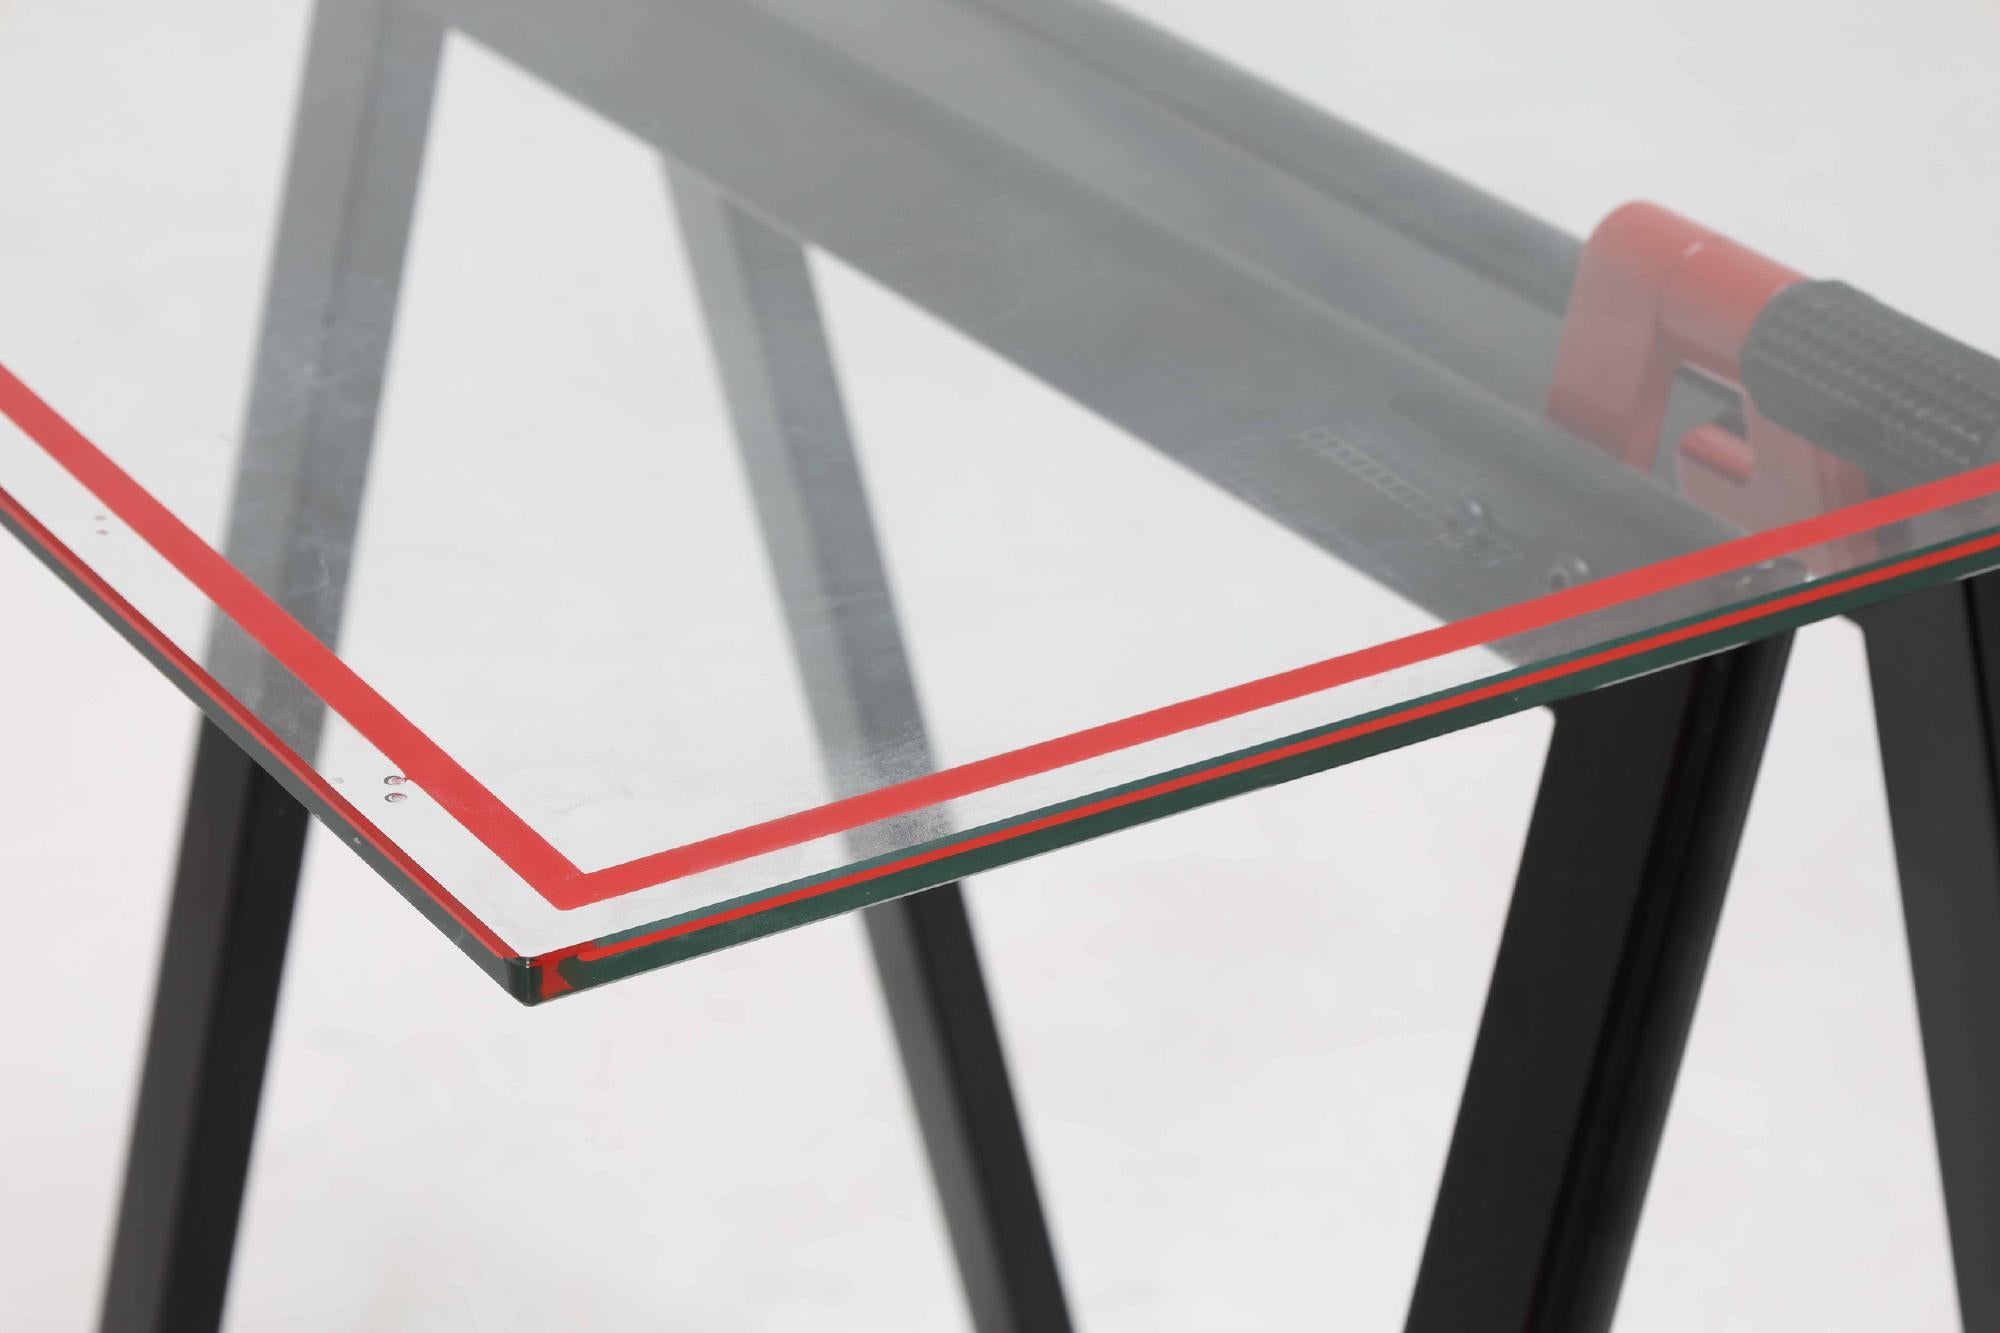 Worktable / desk with original glass top with two black and red colored metal folding saw horse legs. Model Cardine, apart of the Geatano-series designed in the 1970s by Gae Aulenti for Zanotta, Italy. 

Original glass top with red stripe. In good